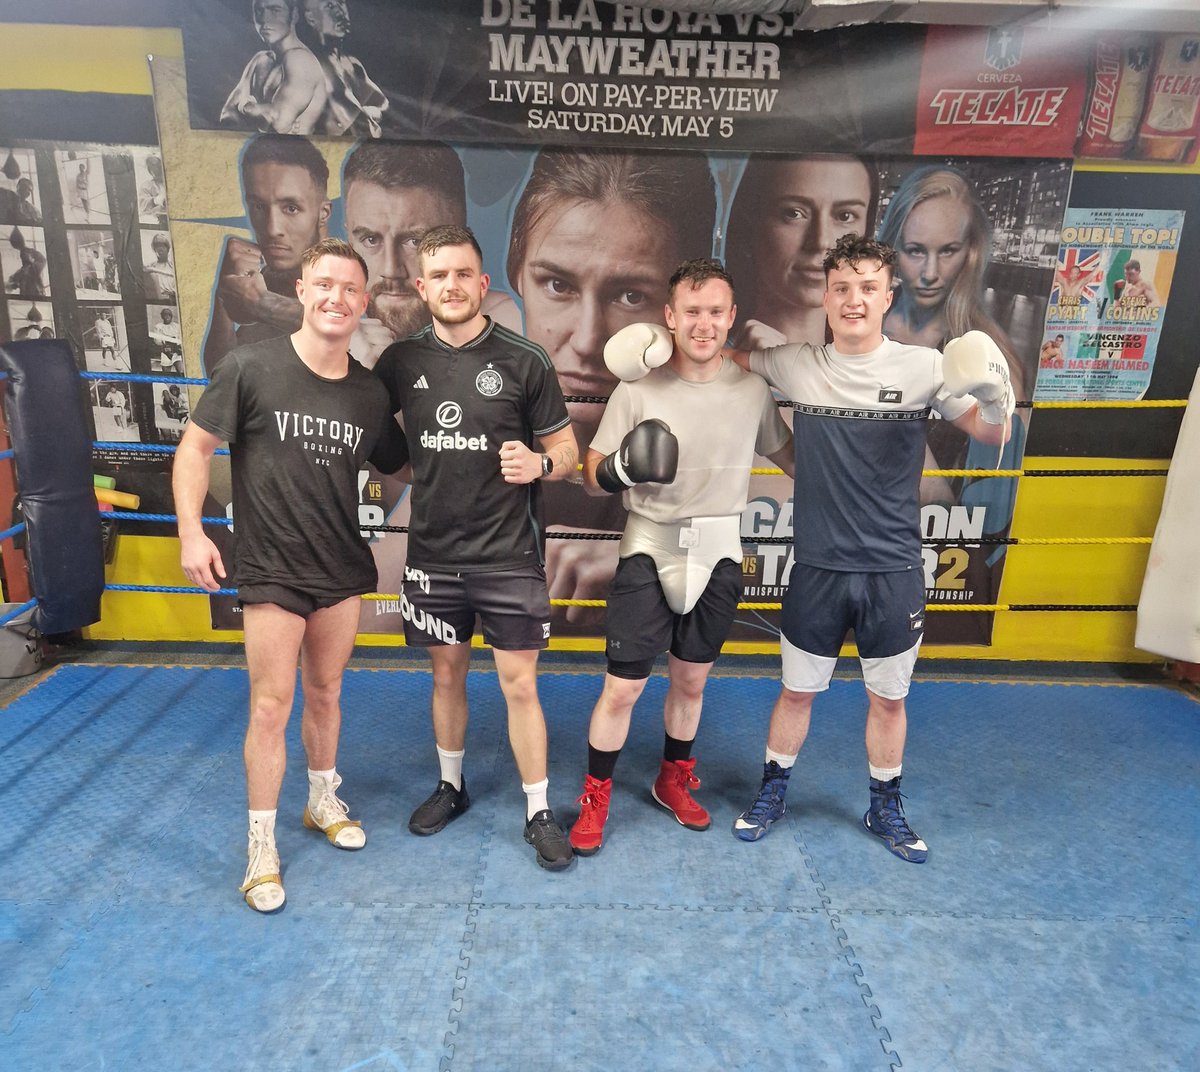 More Rounds today @CWarriorsgym With @AndyLeeBoxing @PaddyDonovan23 @thomas_carty @CathalCrowley14 Gus Jimmy & Danny Boy ☘️🥊